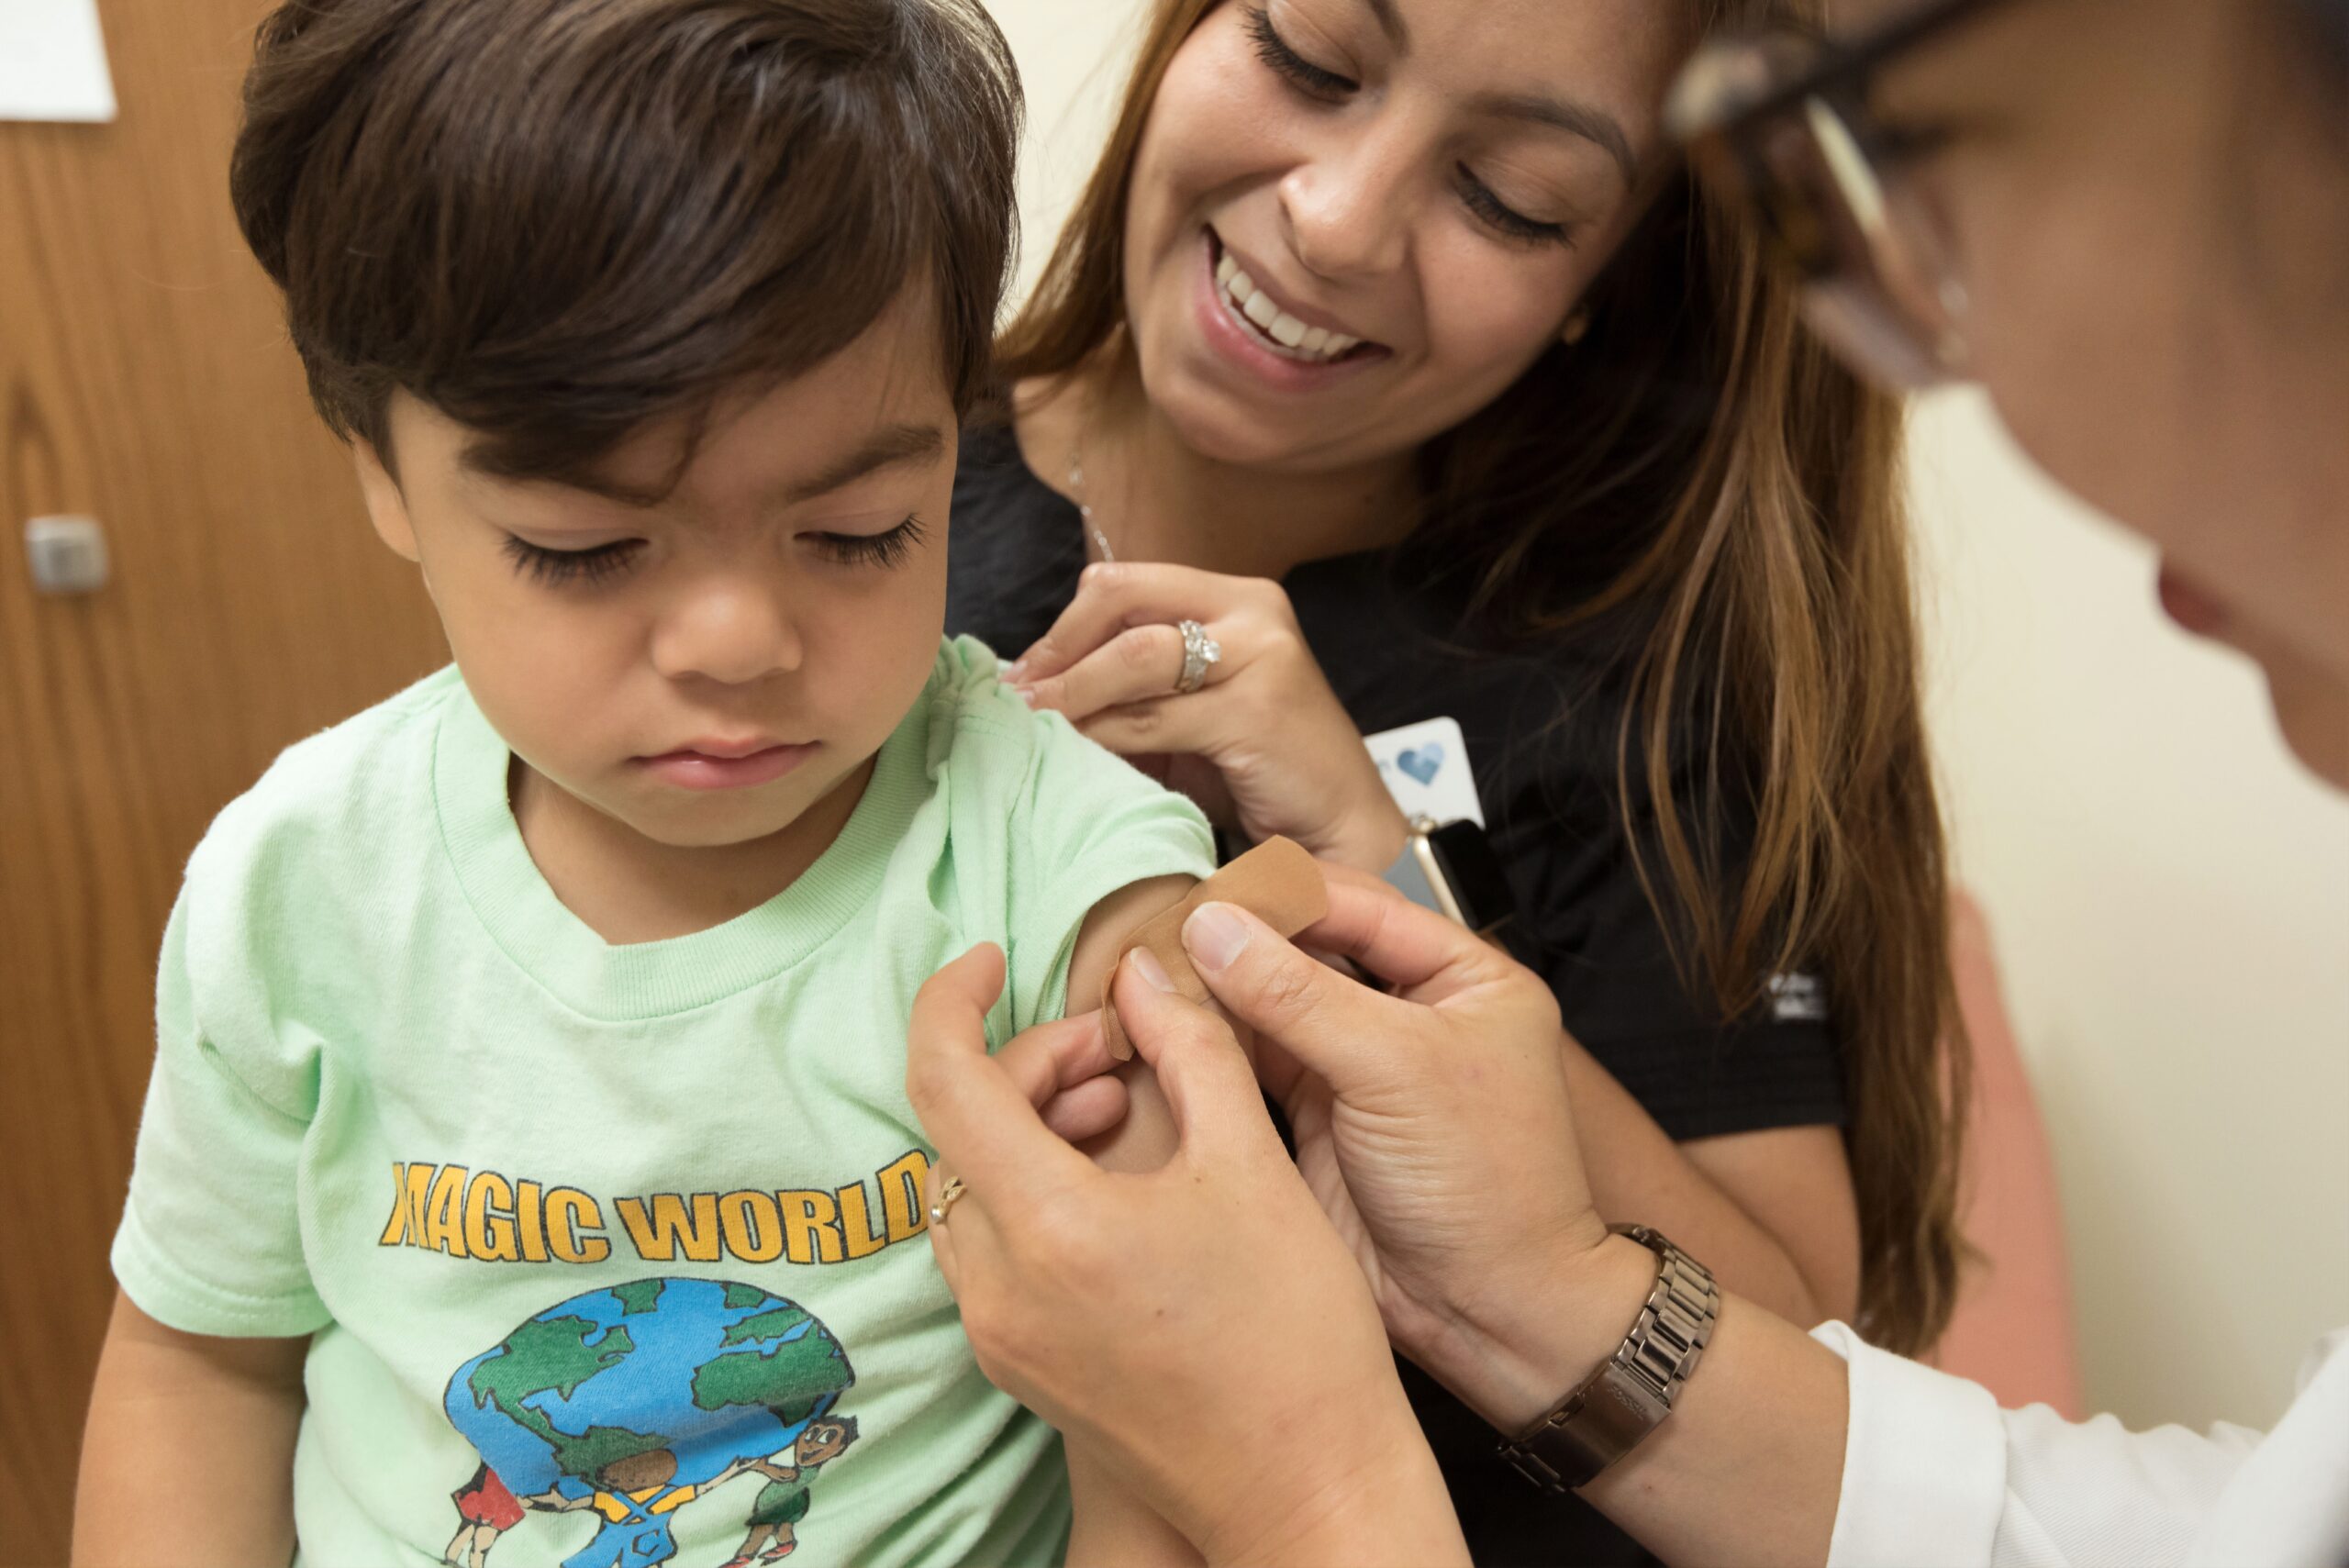 Child gets a band aid applied to his upper arm after receiving the influenza vaccine from his doctor and nurse